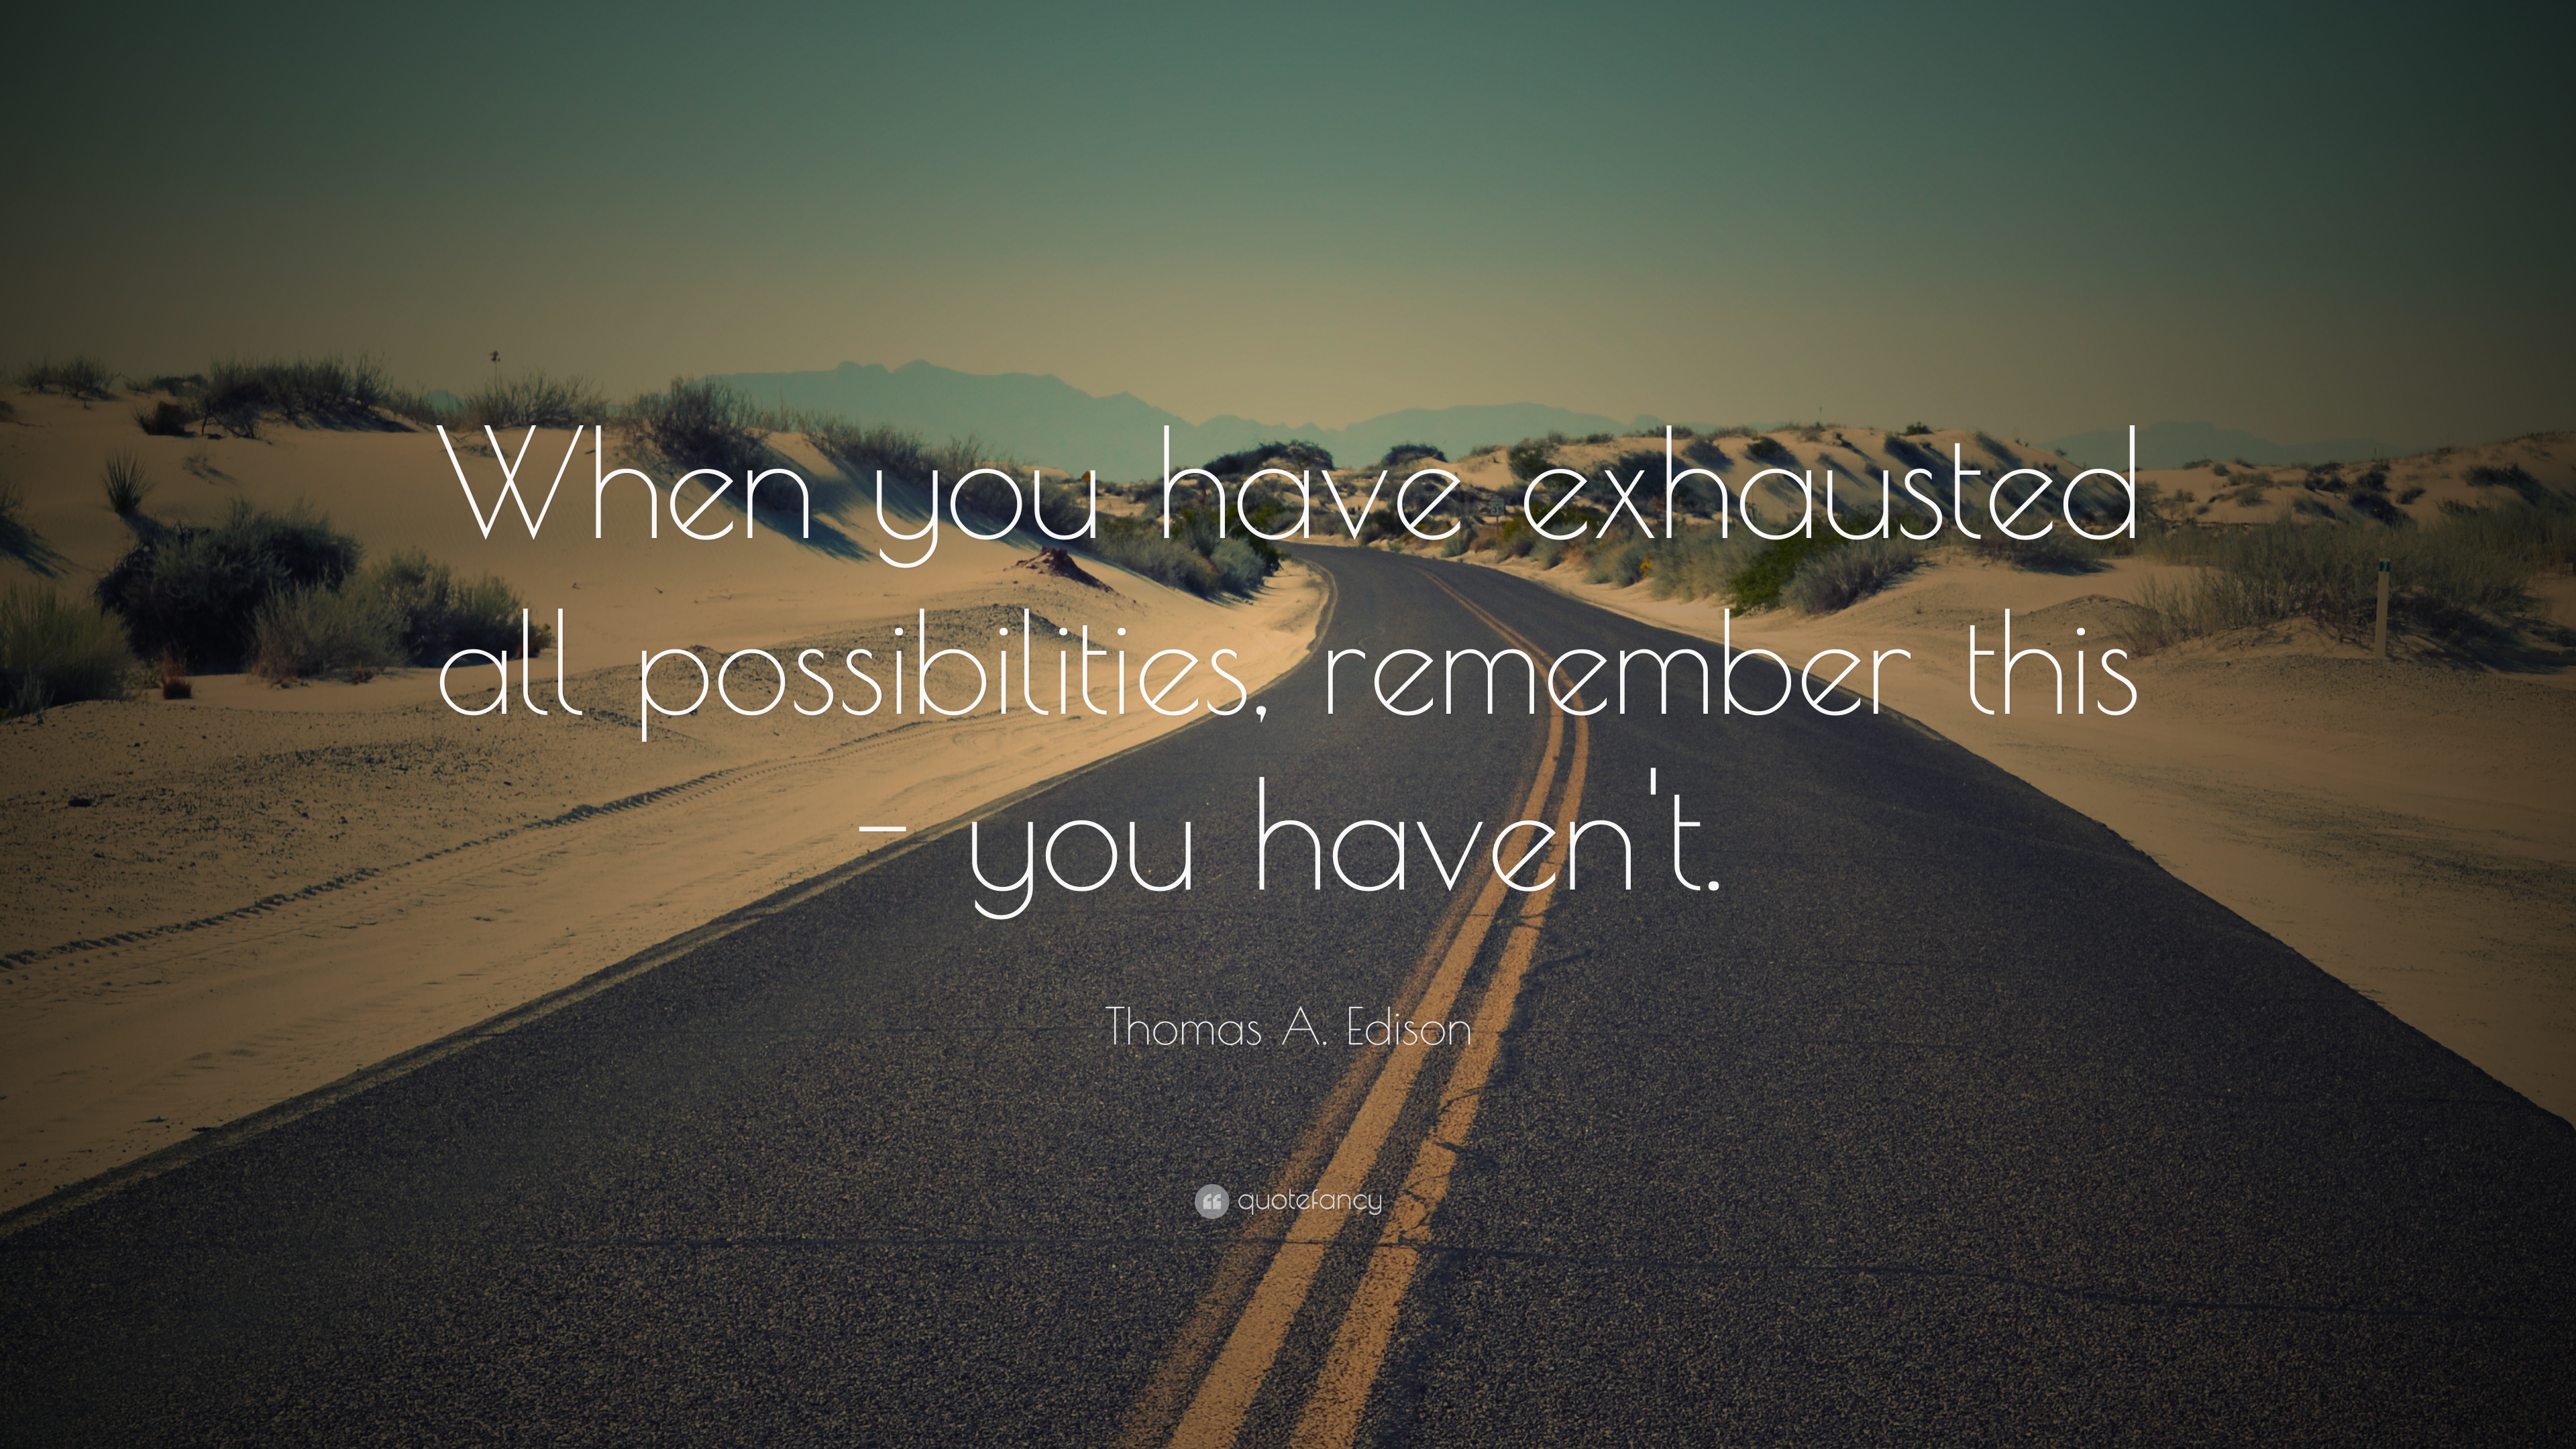 Thomas A. Edison Quote: “When you have exhausted all possibilities ...